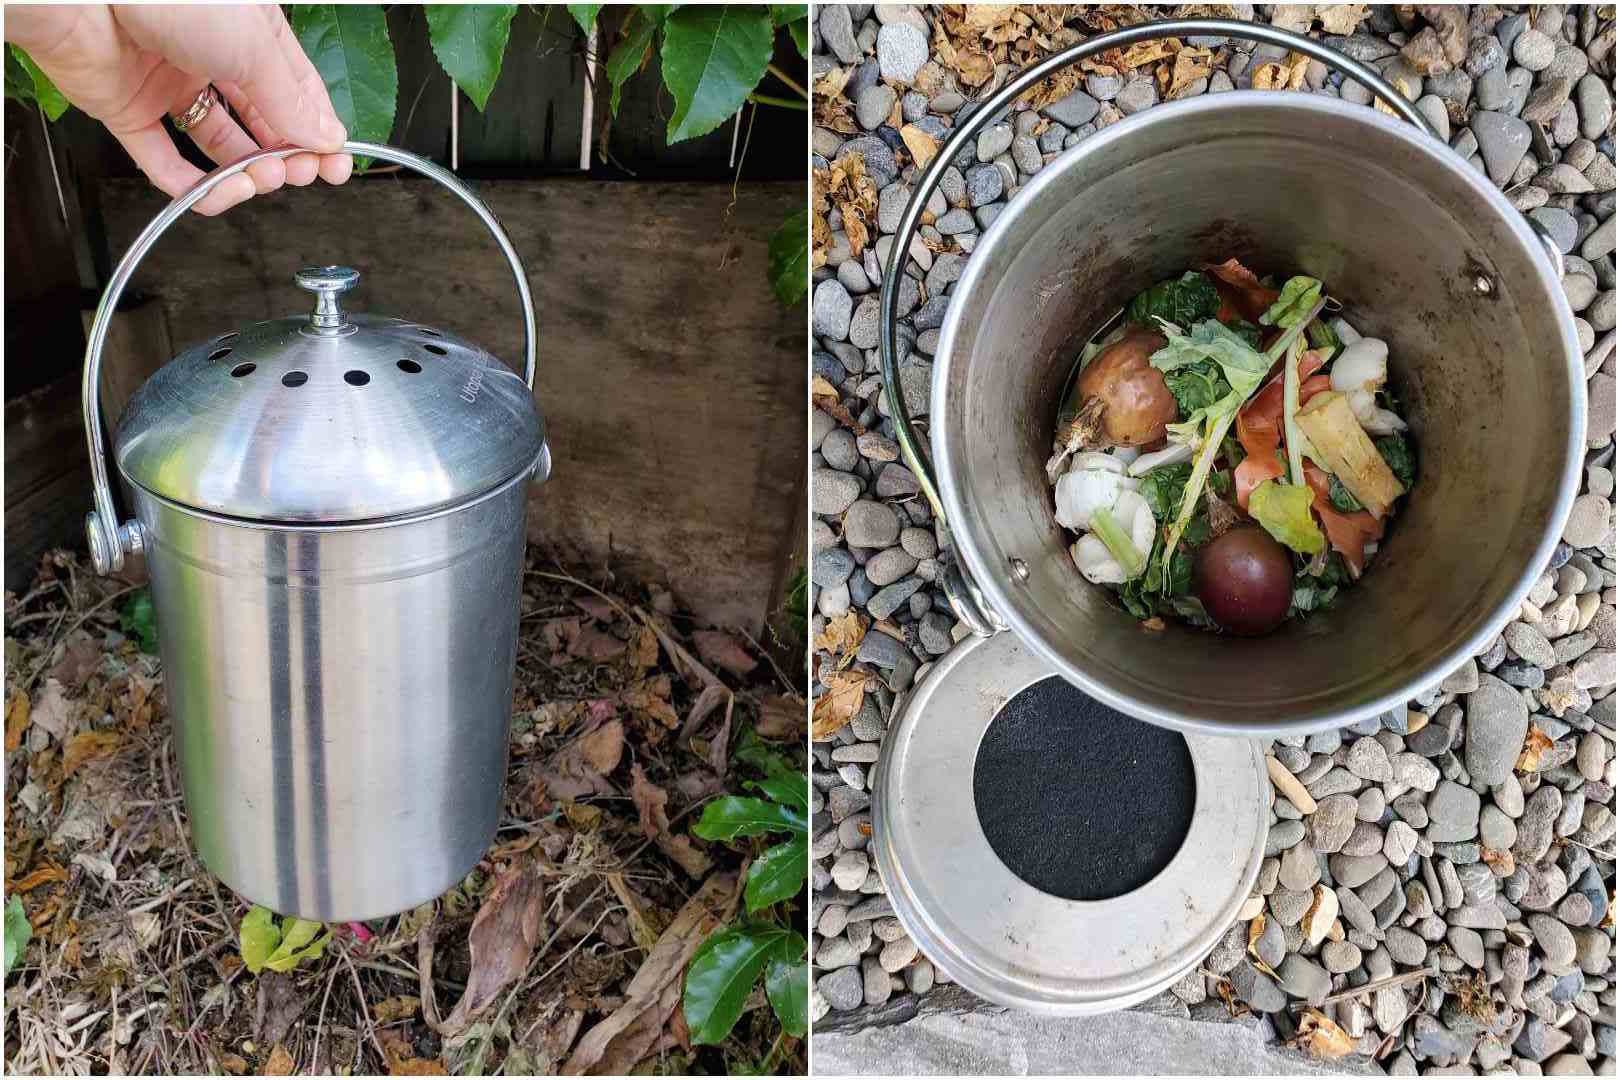 A two part image collage, the first image shows a hand holding a stainless steel compost crock by the handle. They are holding it above a passive compost pile. The second image shows the compost crock on the ground with its lid off, there is some vegetable debris in the bottom third of the crock that will be composted shortly. The inside of the lid is also visible which reveals a black carbon filter that is nestled into it to keep the odors at bay. 